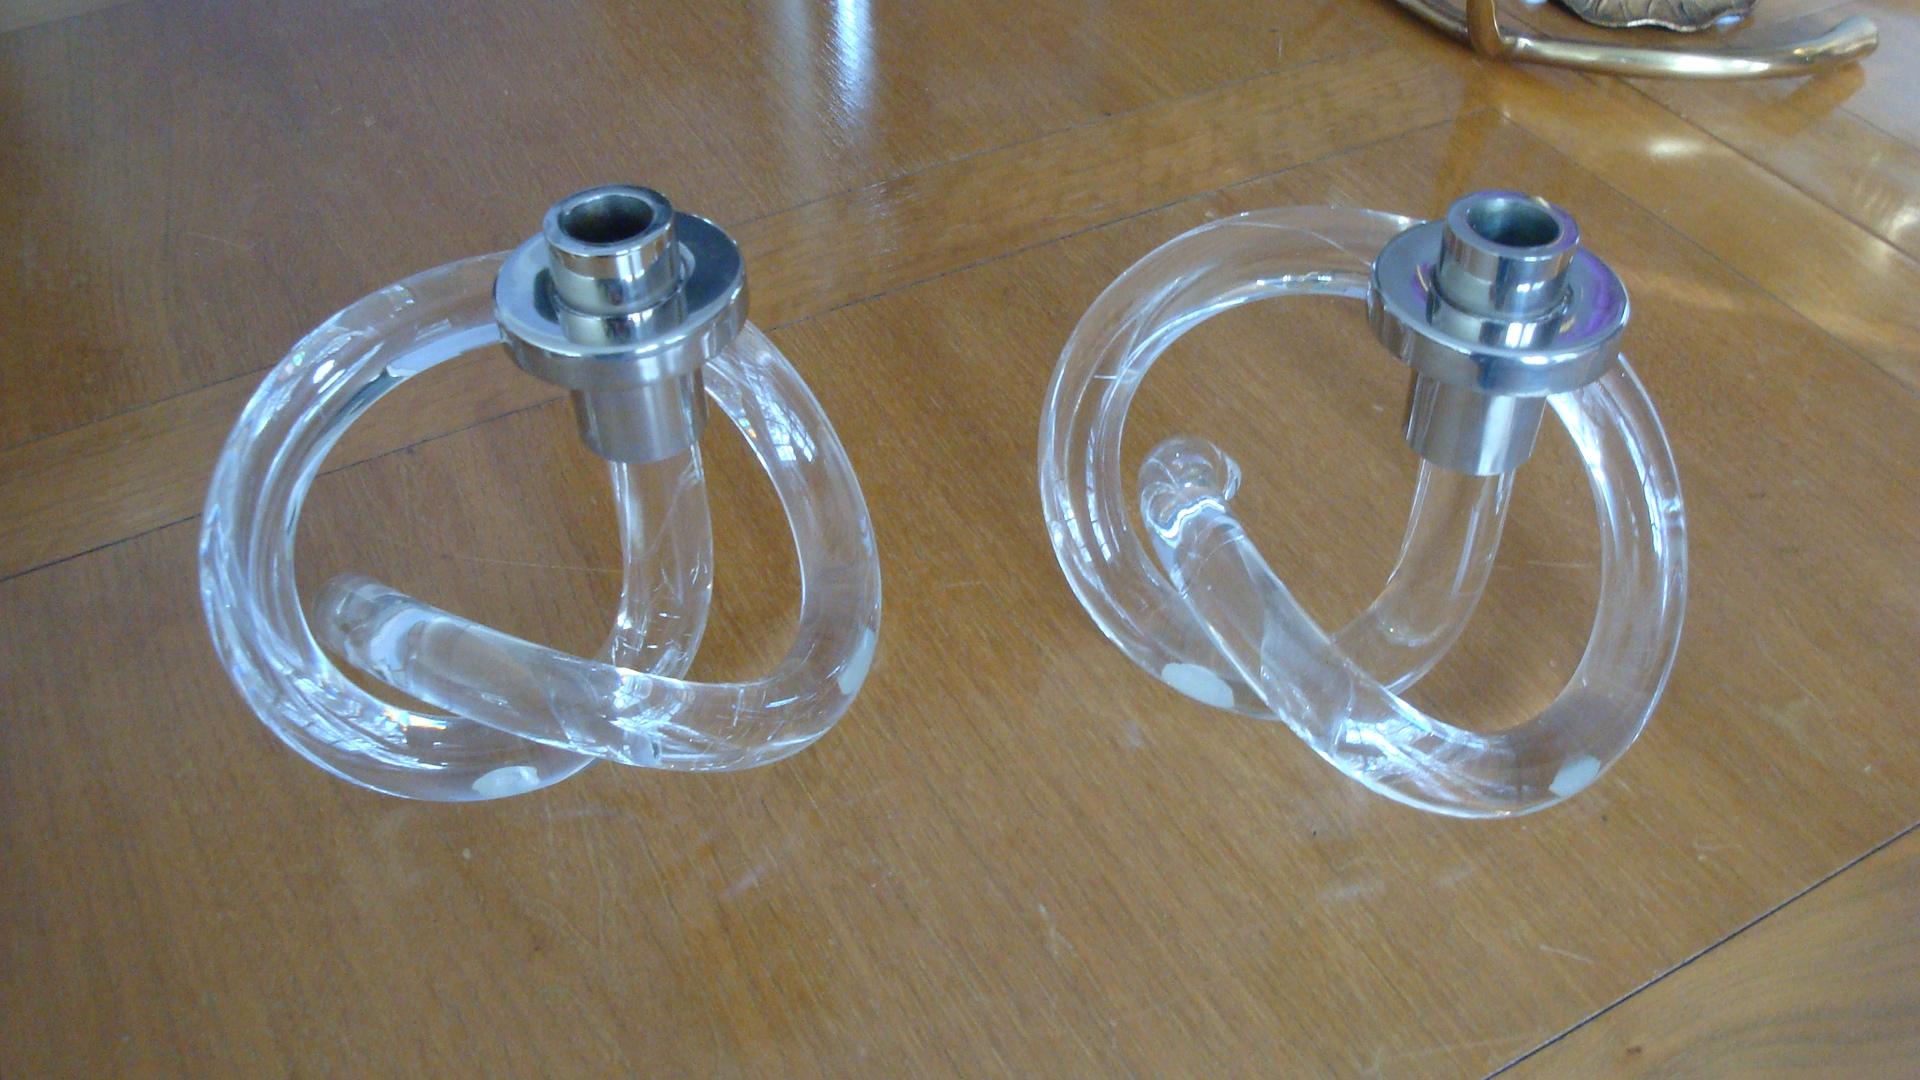 This is a pair of Dorothy Thorpe pretzyl candlesticks from the 1950s.